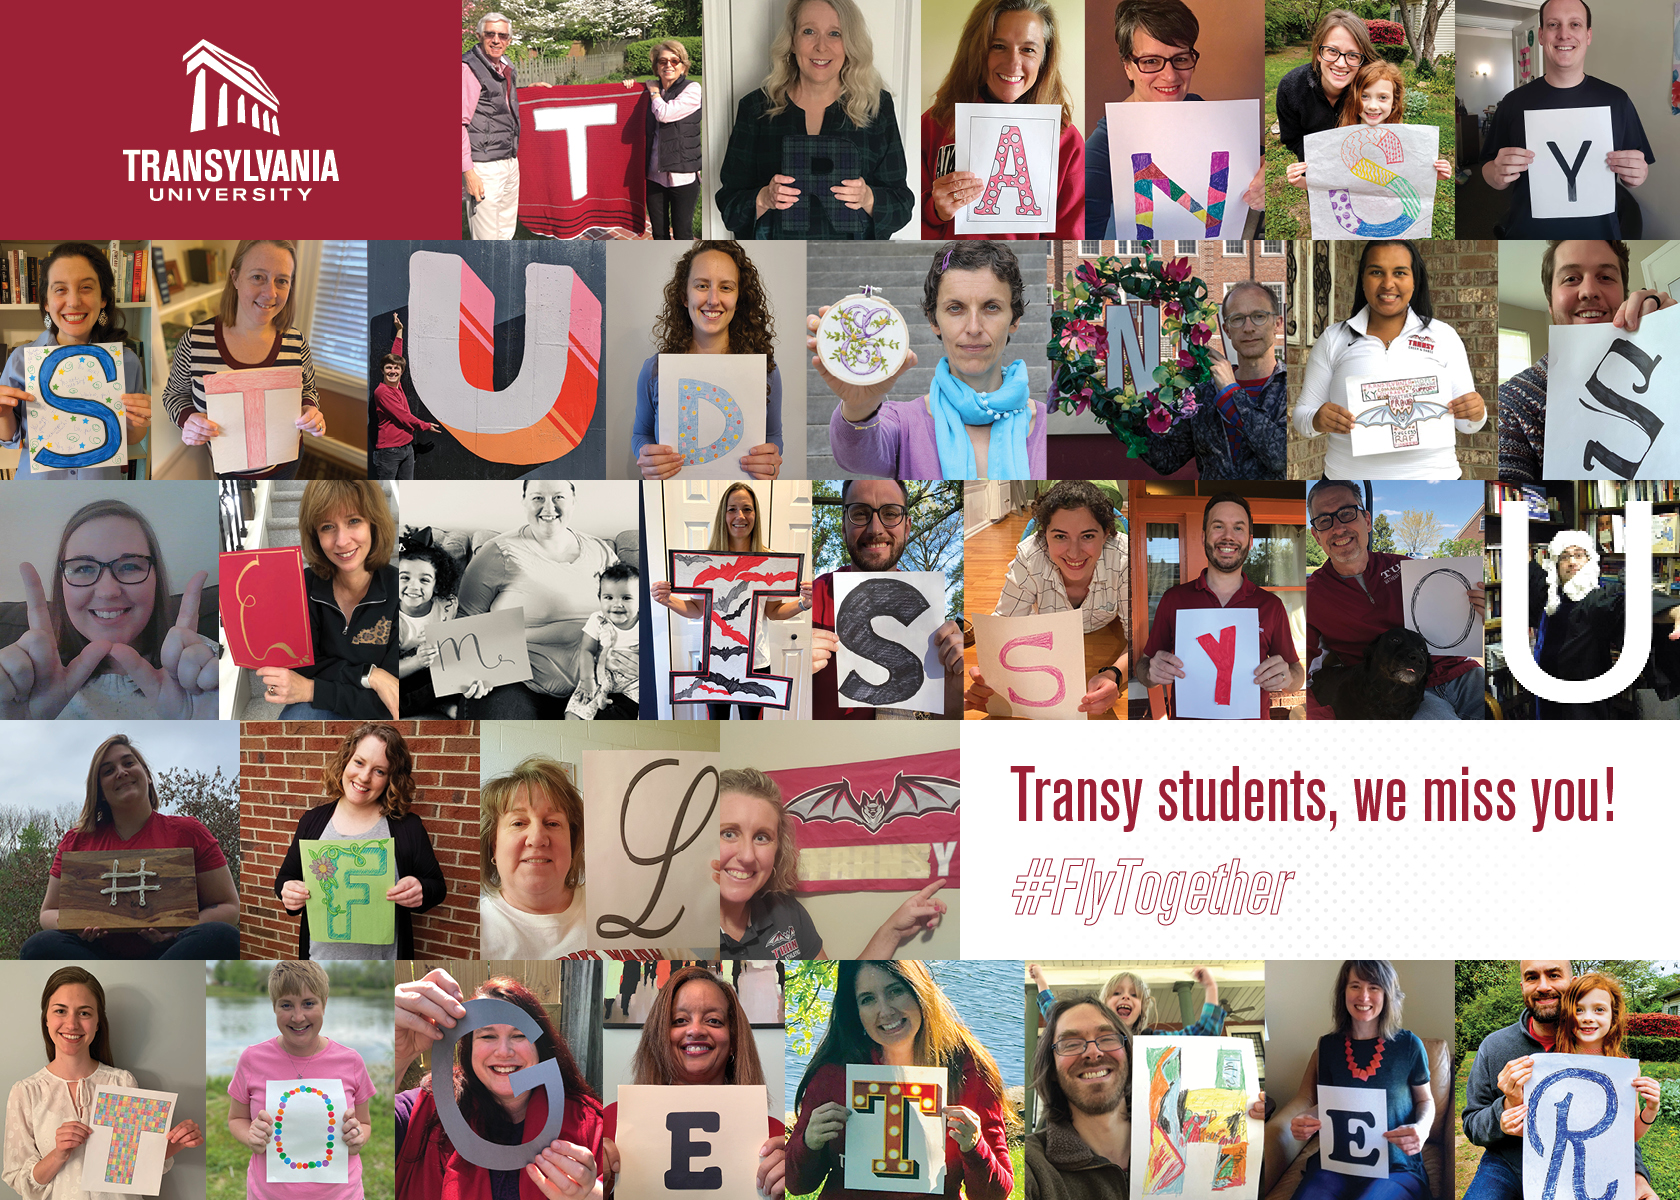 Transy students, we miss you!